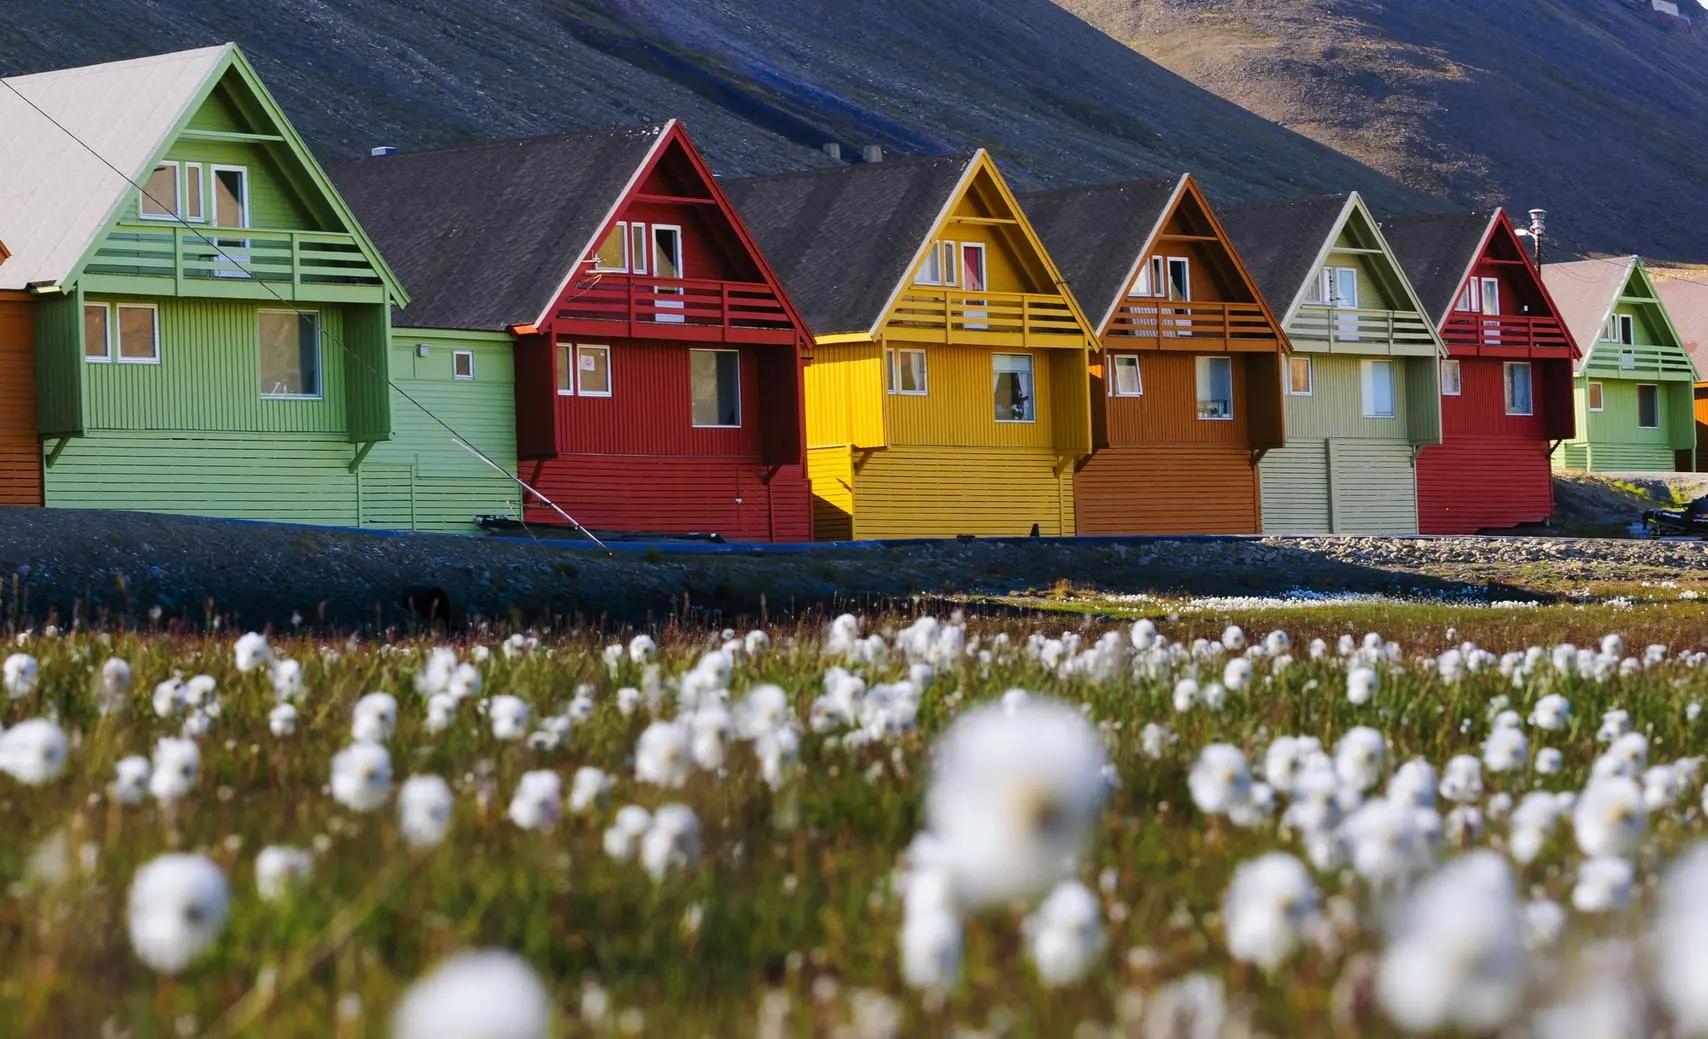 Visit Norway's Longyearbyen and sail the Svalbard archipelago in the Arctic Ocean